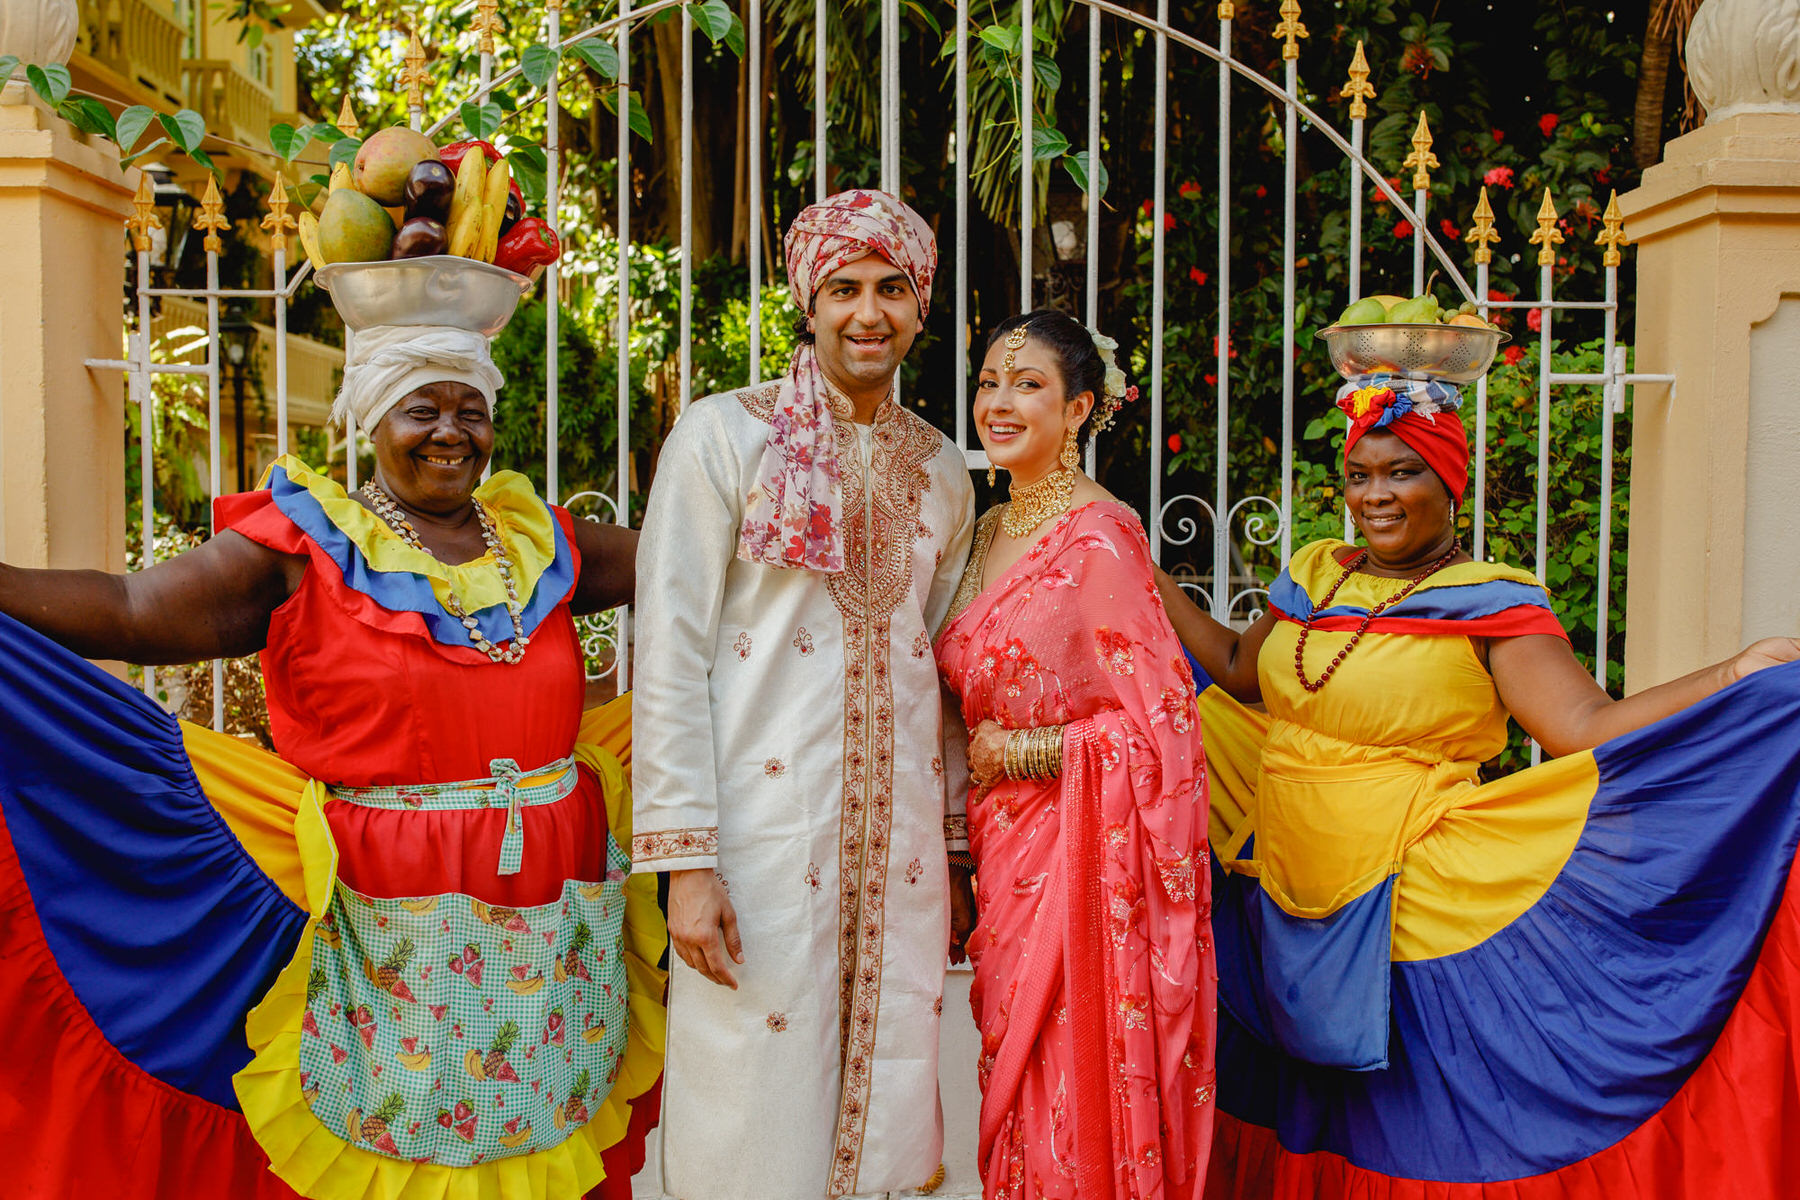 The streets of Cartagena are vibrant with colors and full of history and culture. Perfect location for an Indian wedding 